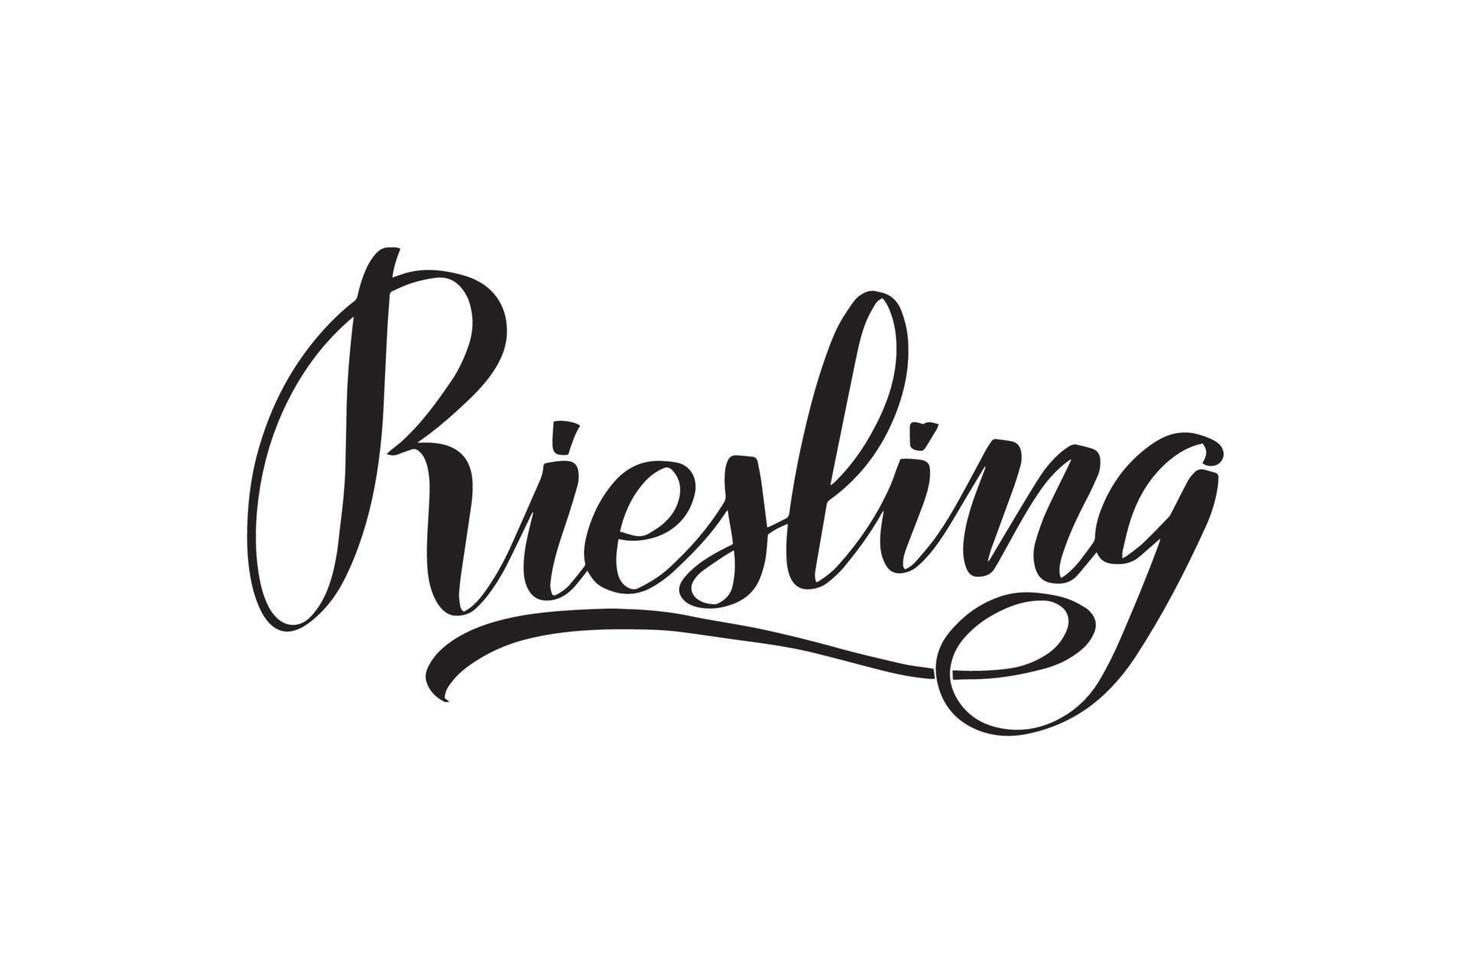 Inspirational handwritten brush lettering Riesling. Vector calligraphy illustration isolated on white background. Typography for banners, badges, postcard, tshirt, prints, posters.